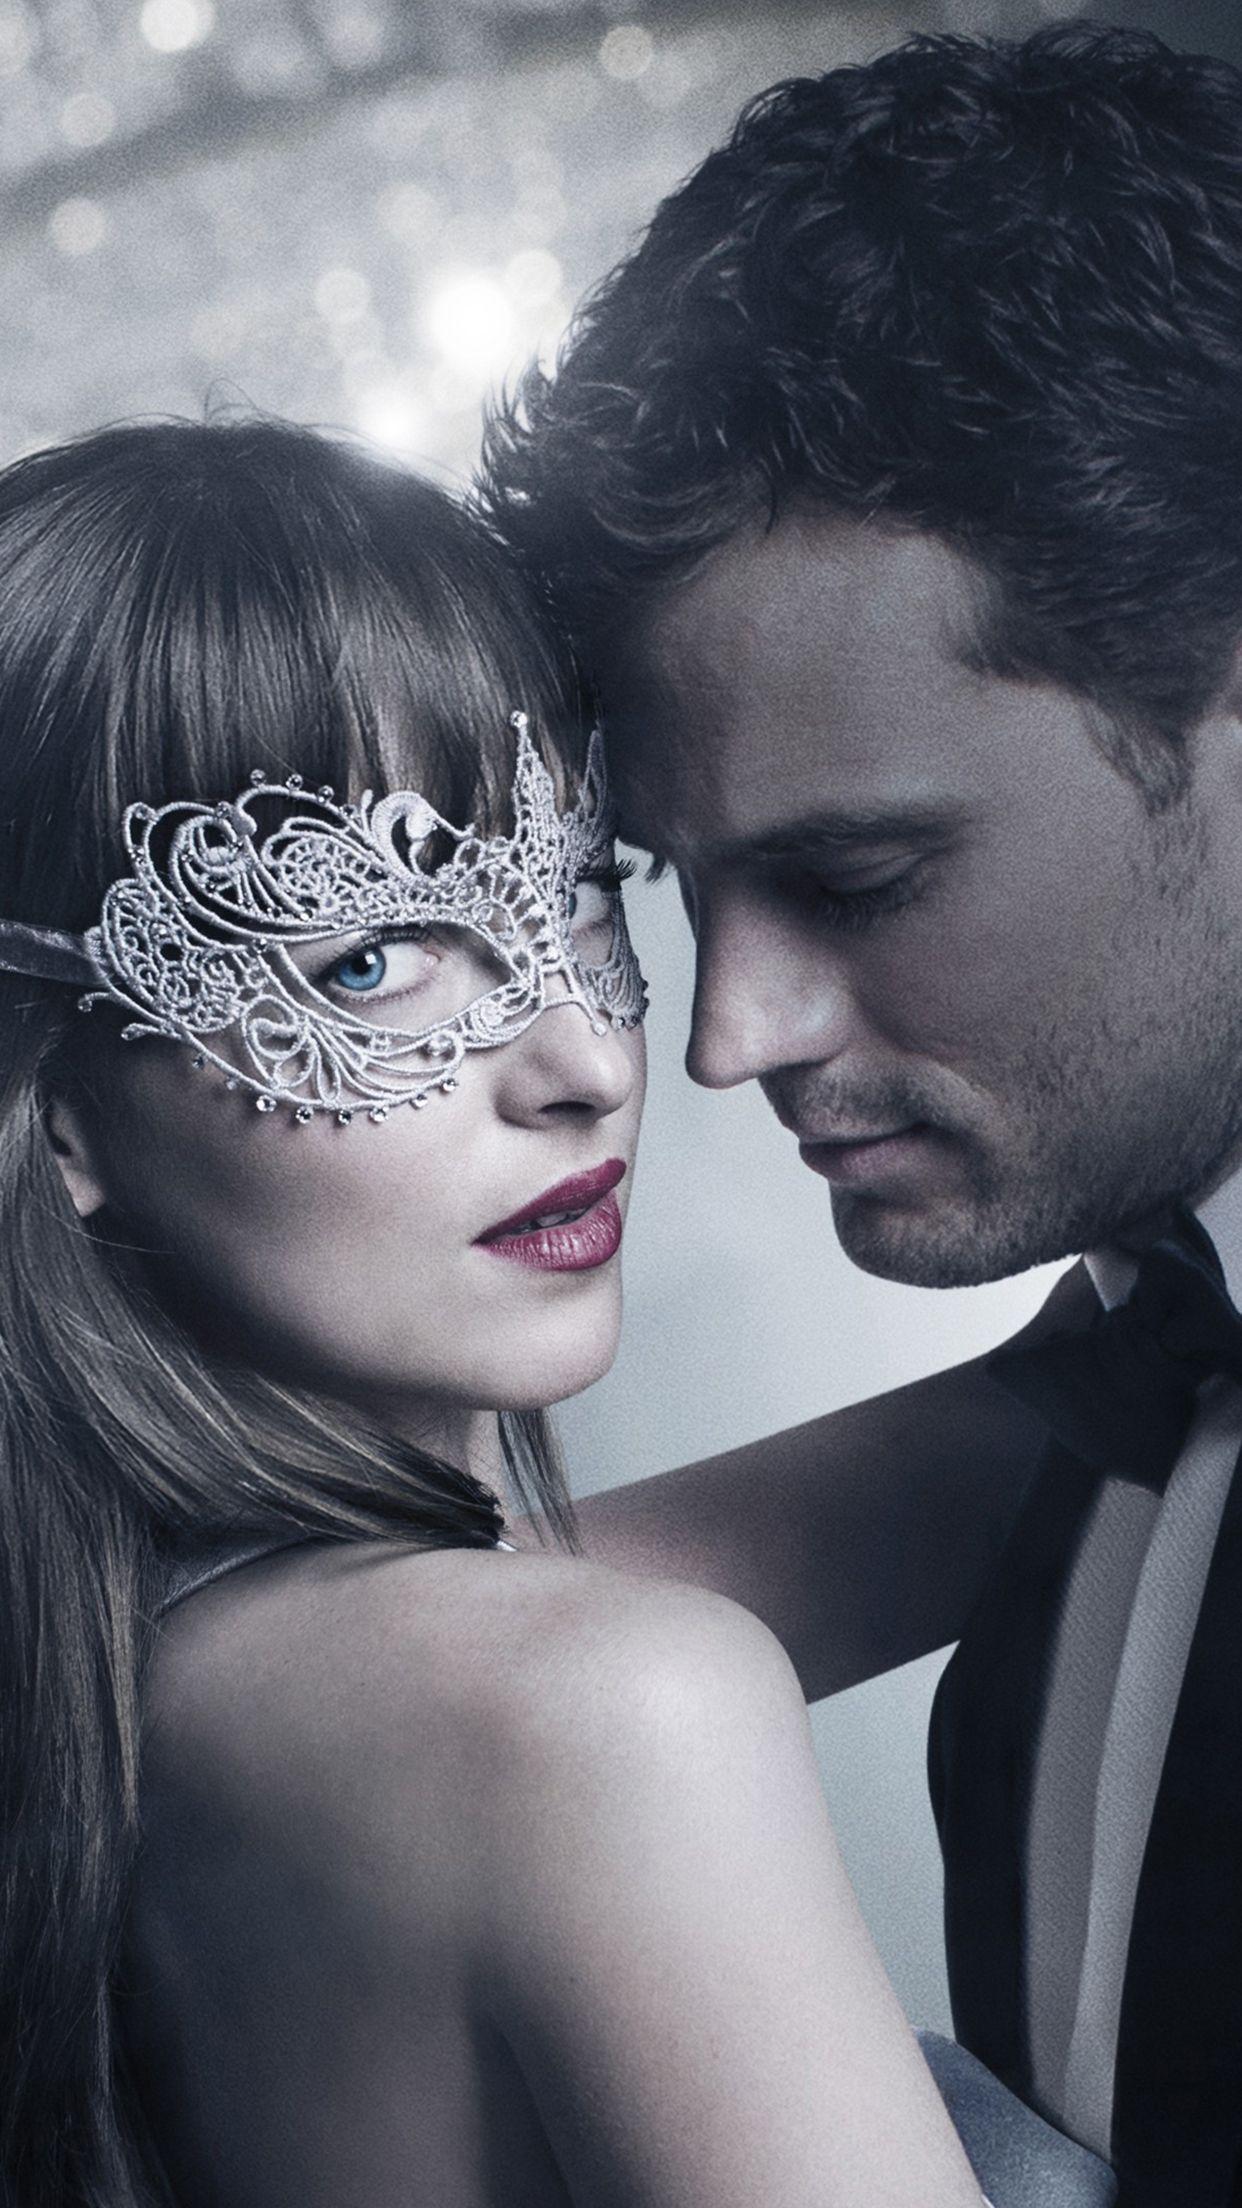 Fifty Shades Darker, Christian & Ana Wallpaper for iPhone X, 7